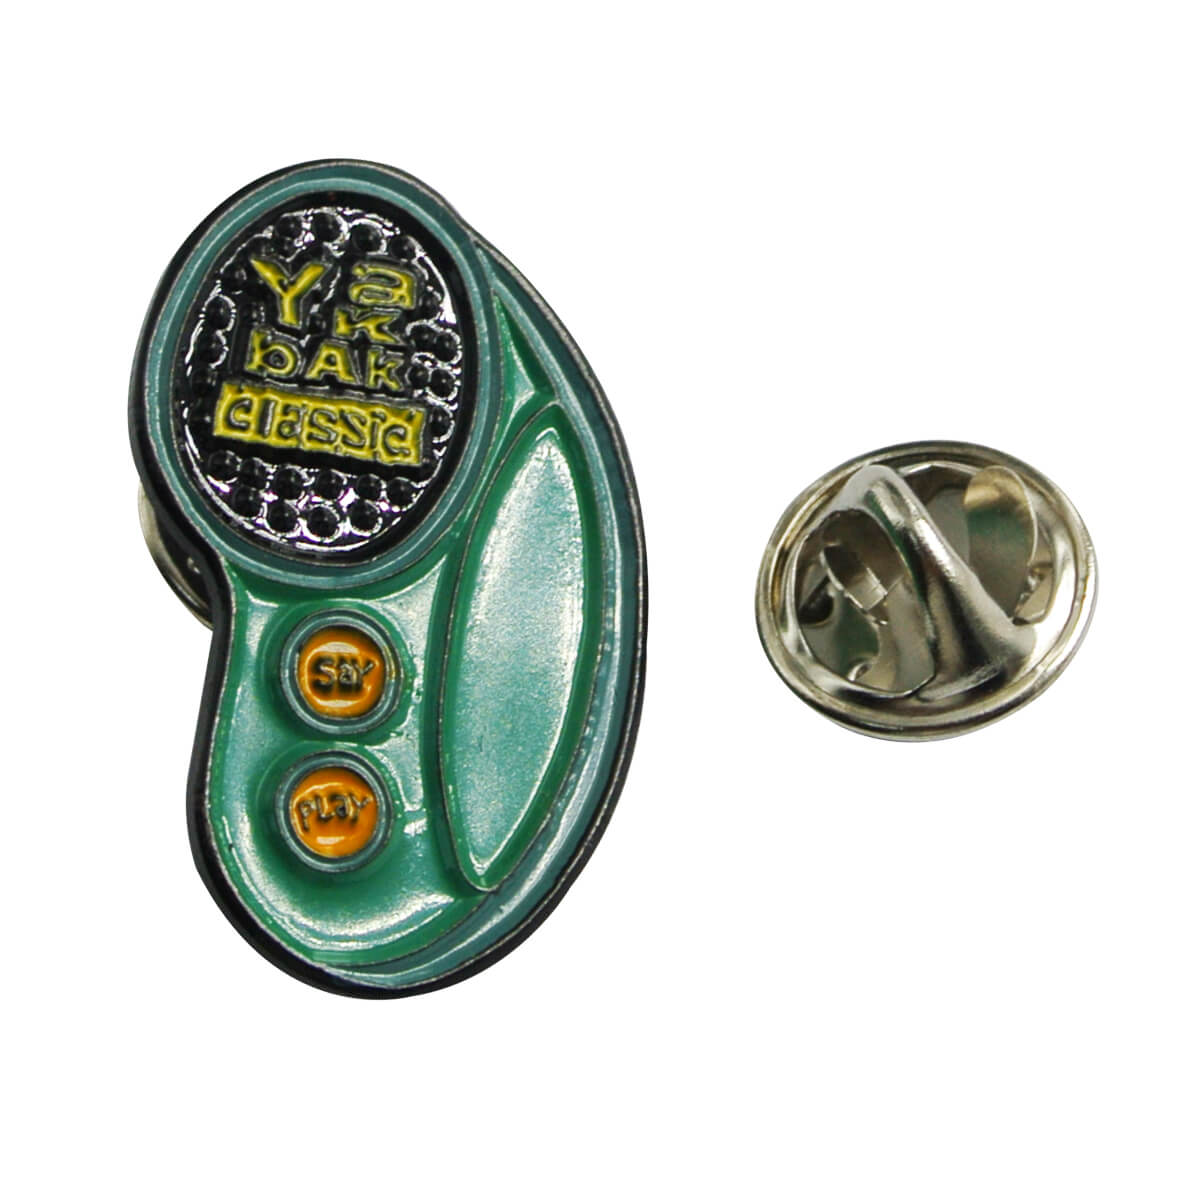 Custom high quality die casting create your own pin